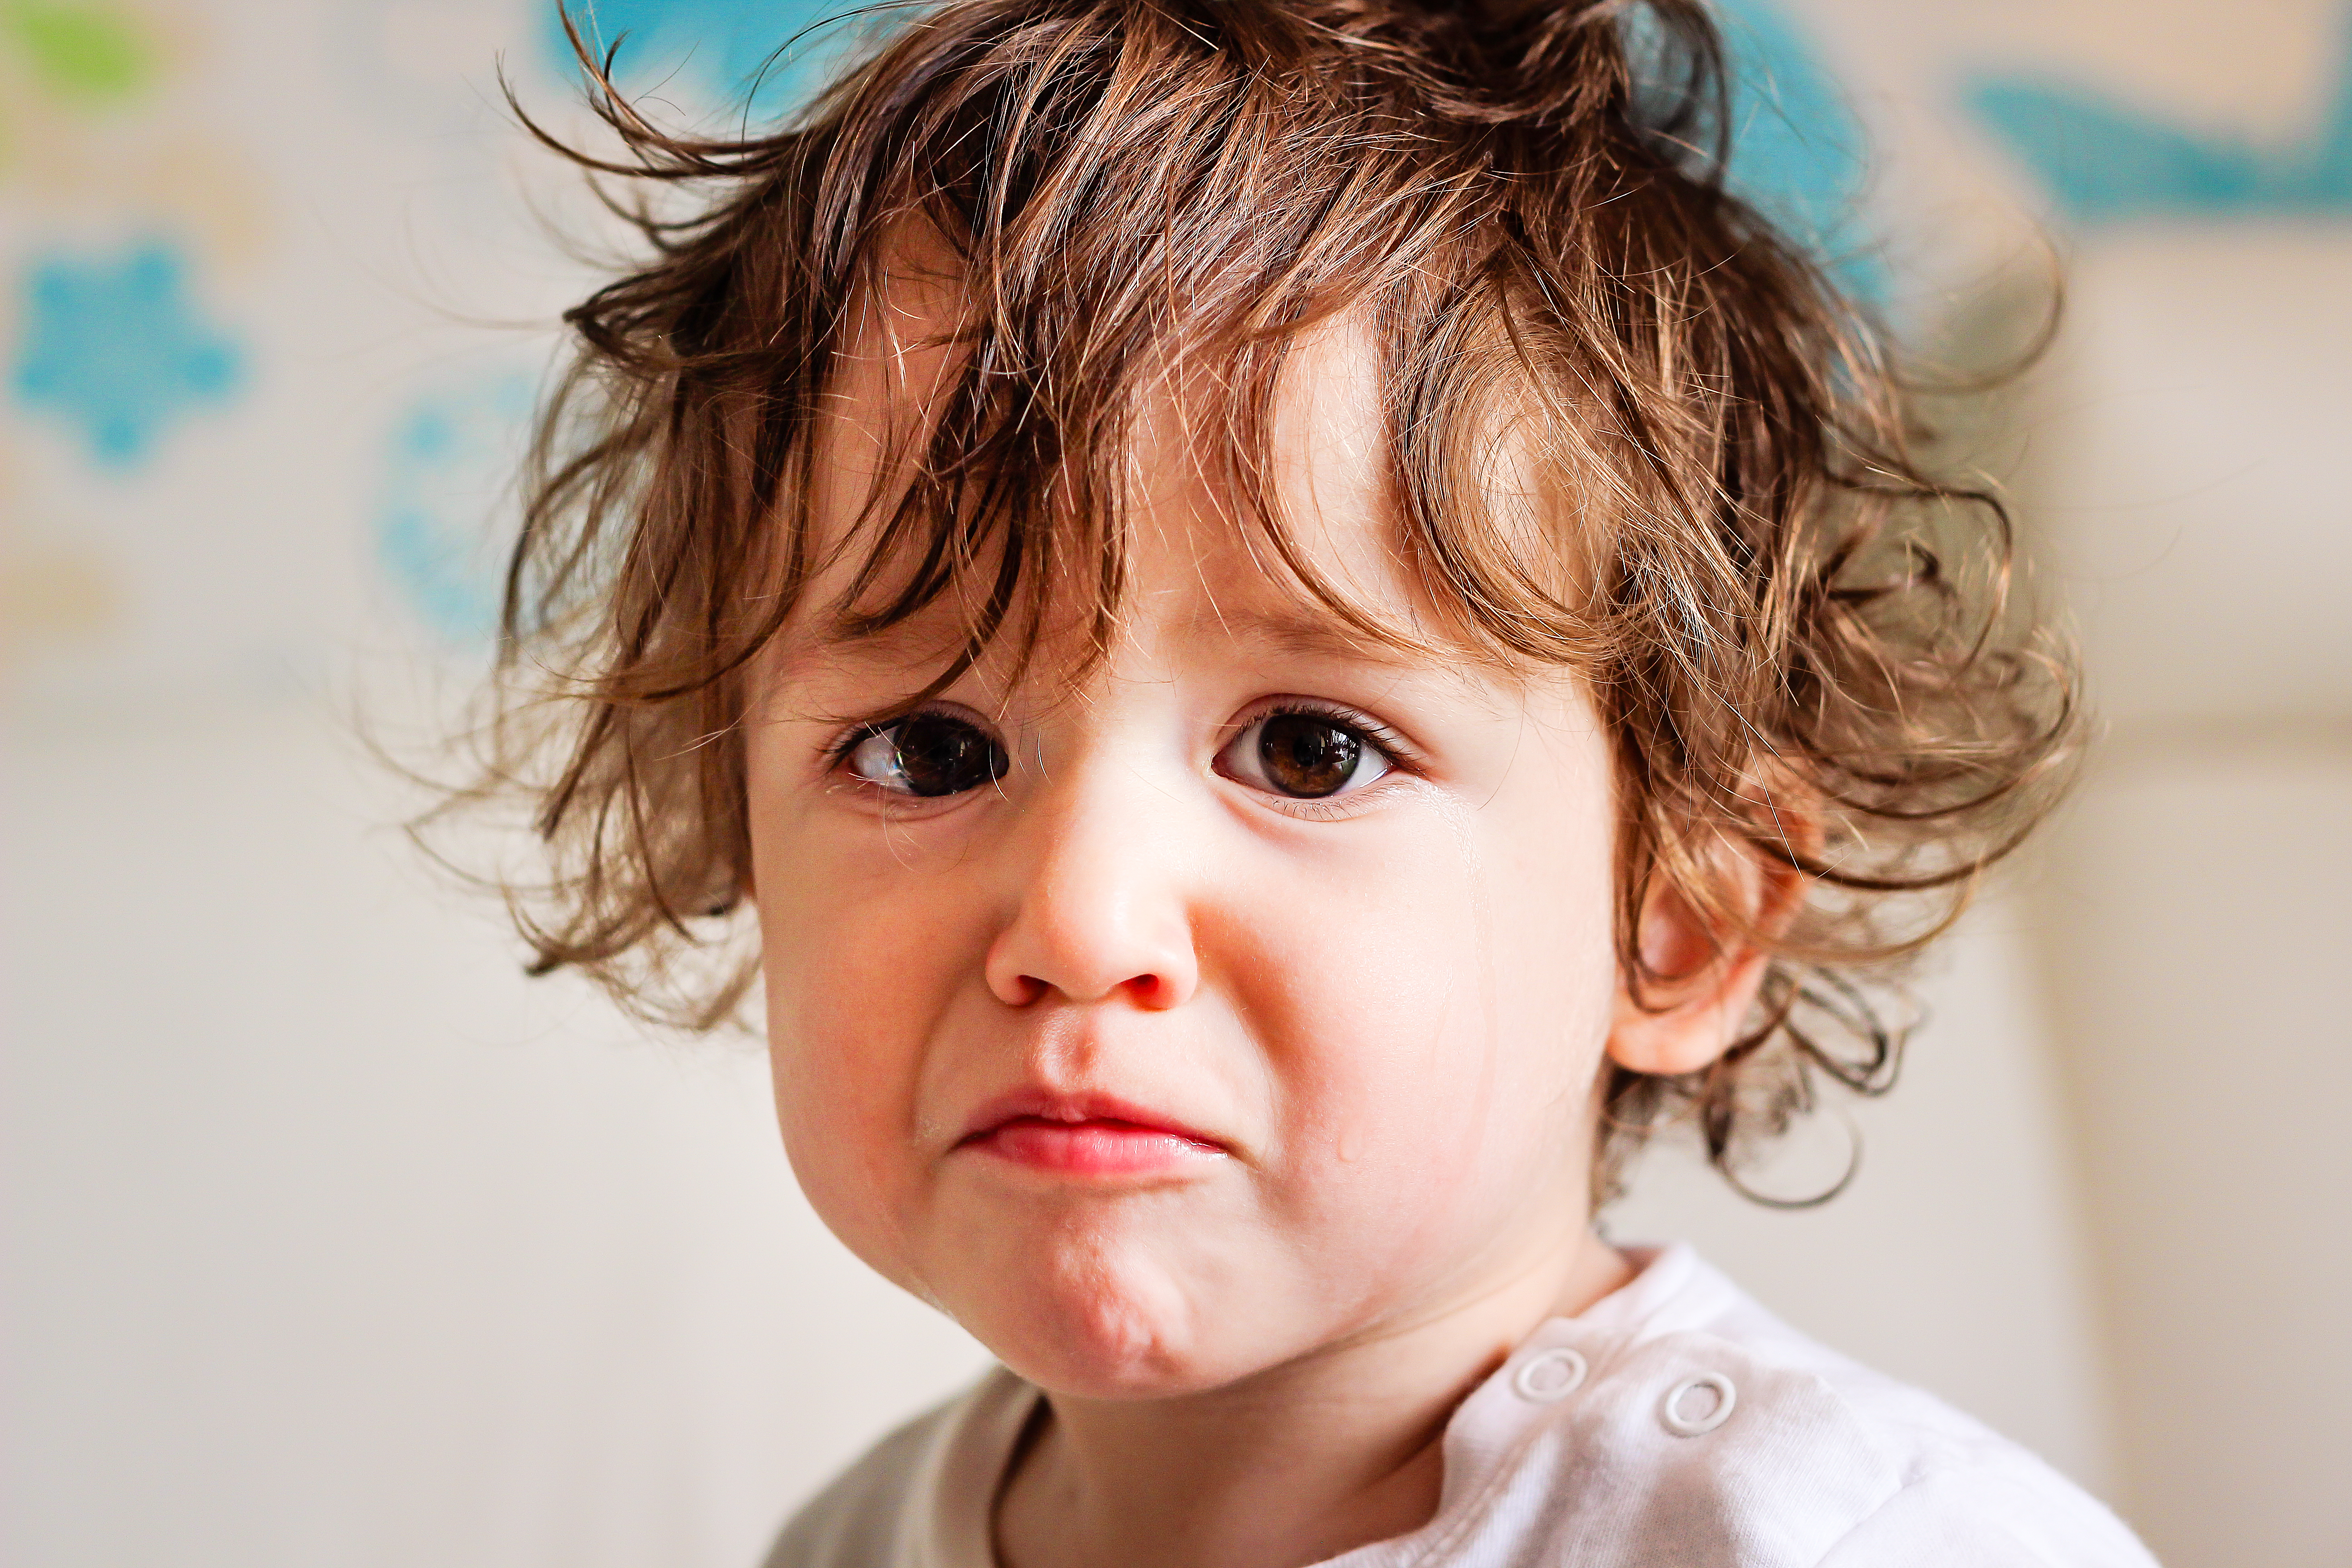 A said looking toddler | Source: Shutterstock